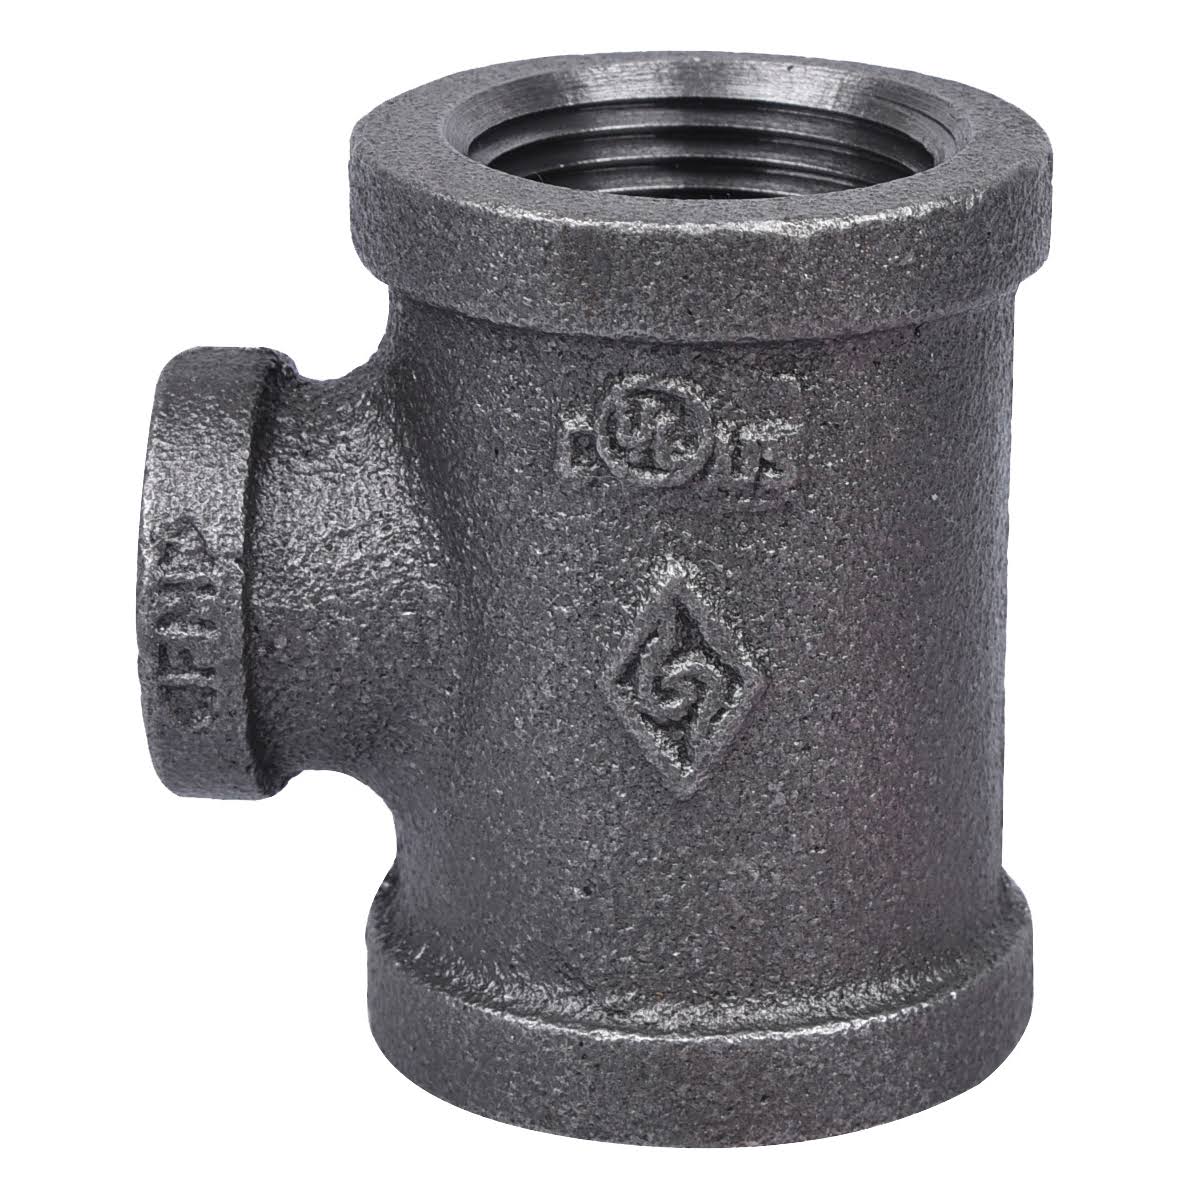 Prosource 11A1X1/2B Pipe Tee, 1/2 x 1 in, Threaded, Malleable Iron, SCH 40 Schedule, 300 PSI Pressure